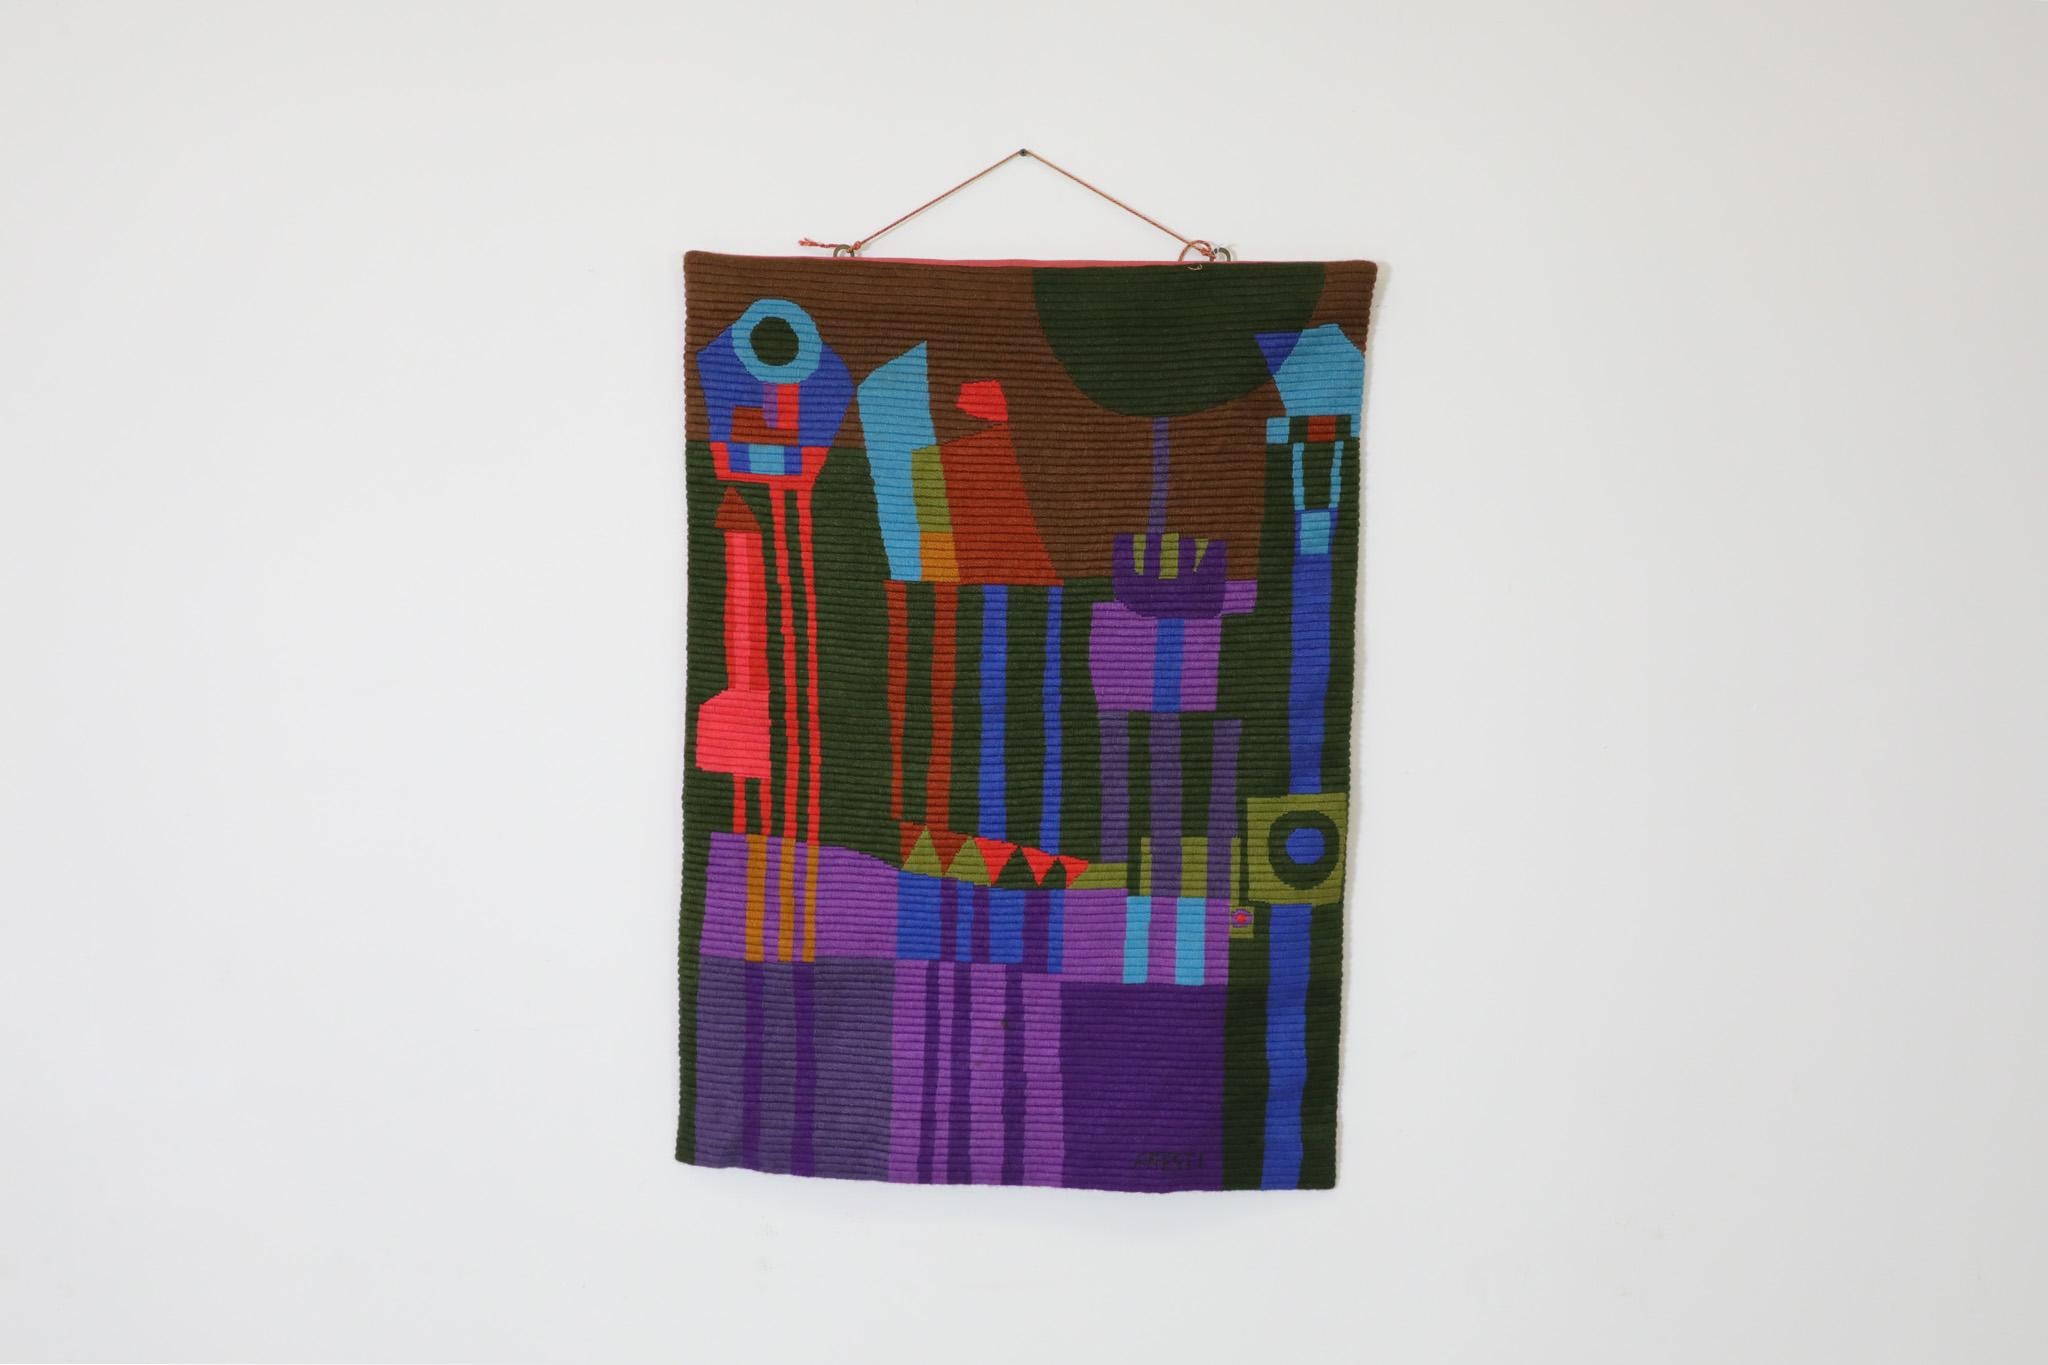 Mid-Century, Aresti, hand dyed woven fiber art tapestry. This abstract colorful textile art is made of thick knit cotton and has hanging string attached to the top. 